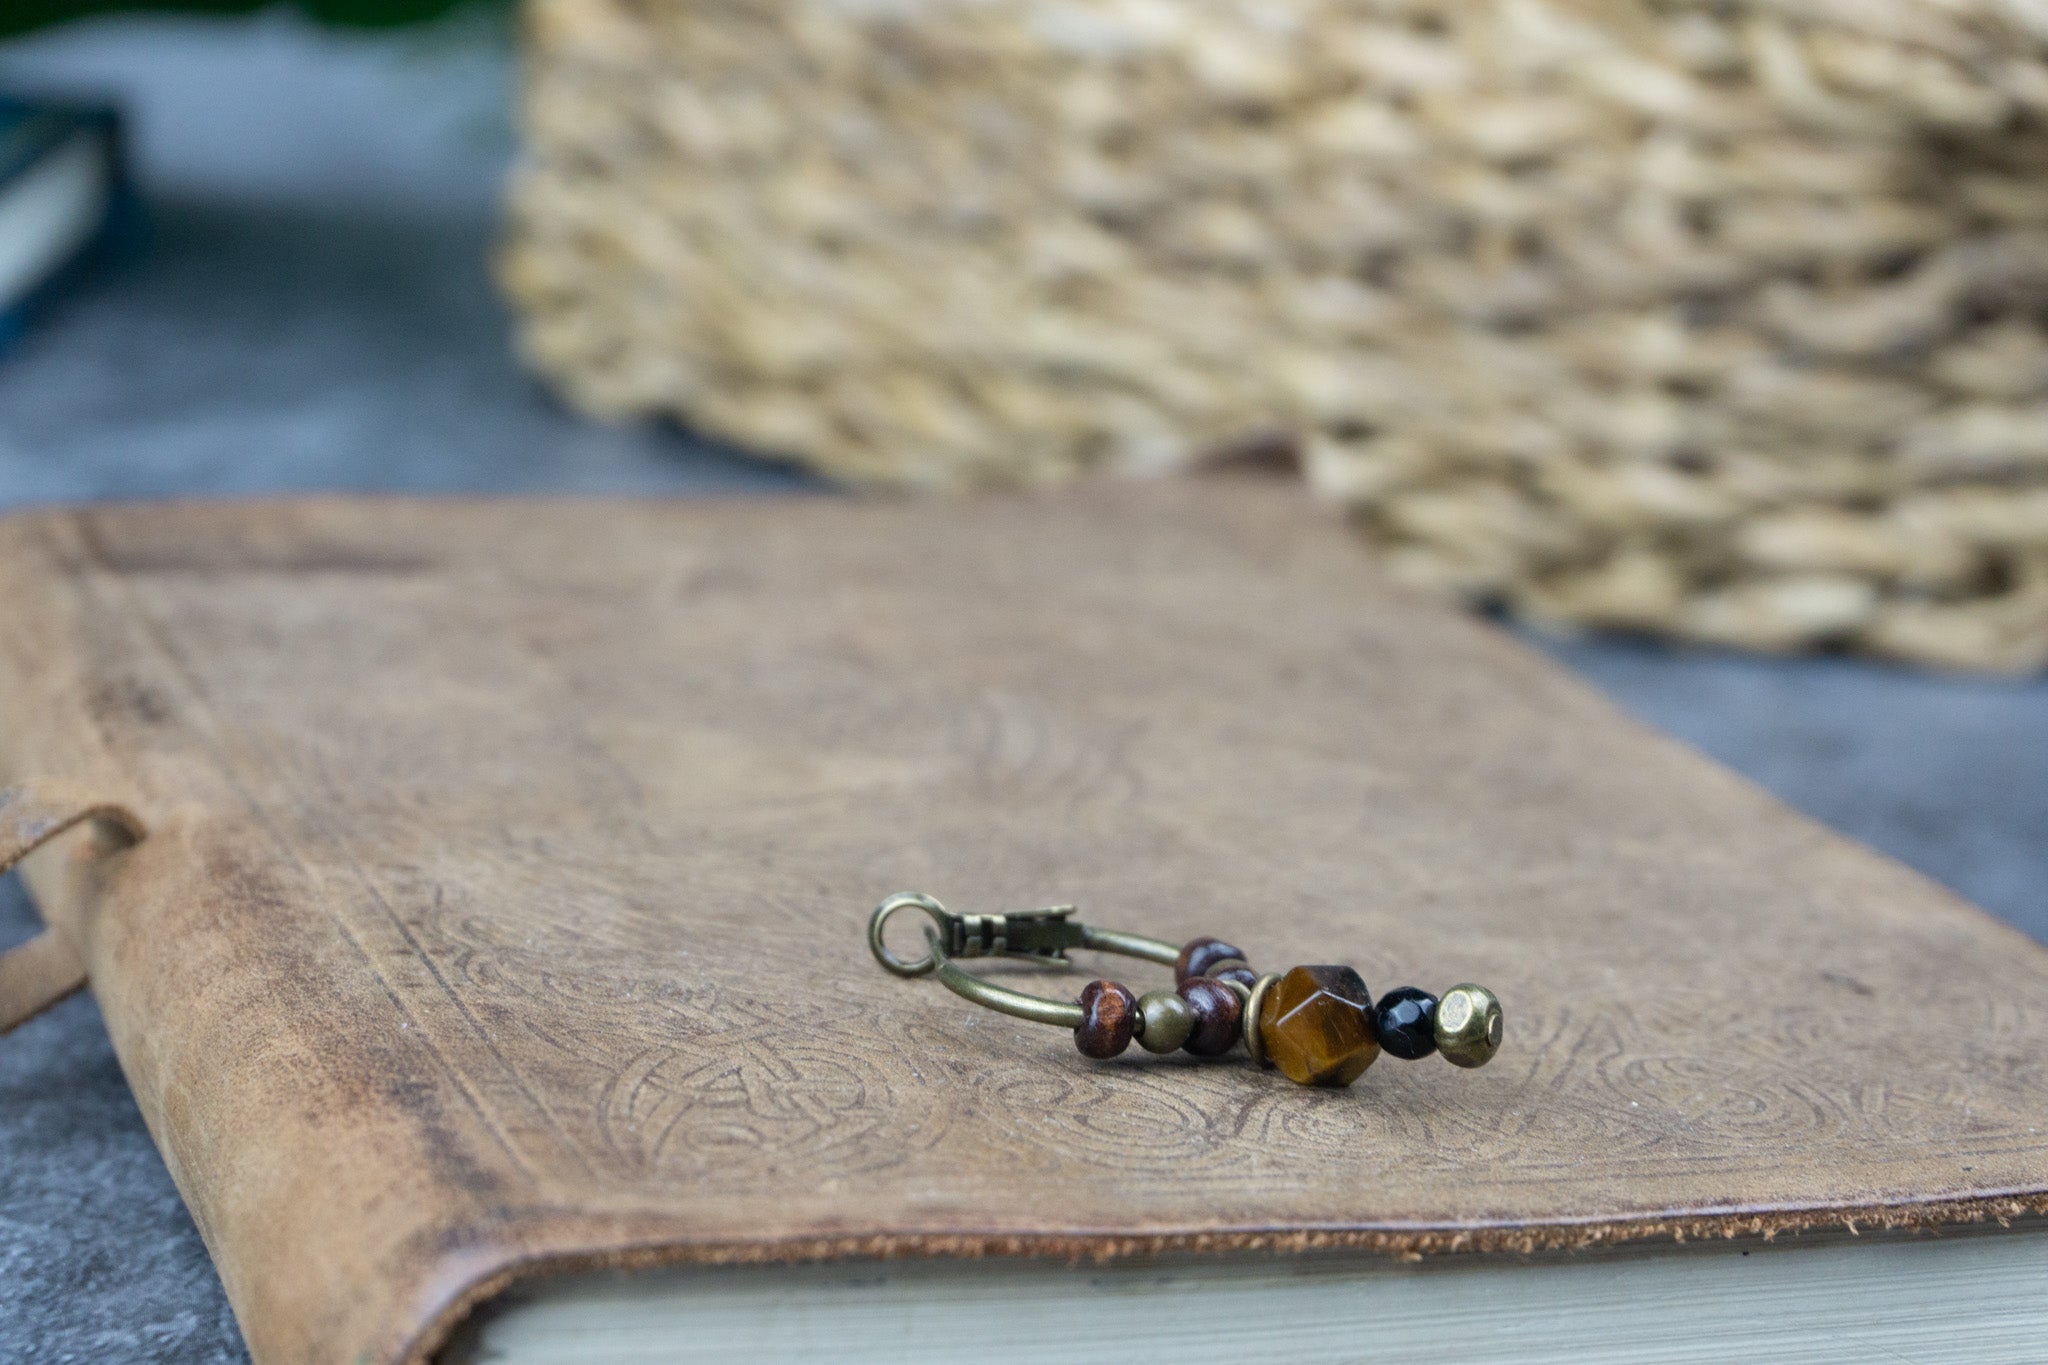 A bronze hoop earring, with wooden and brass beads, a dangling tiger eye and black onyx stone 